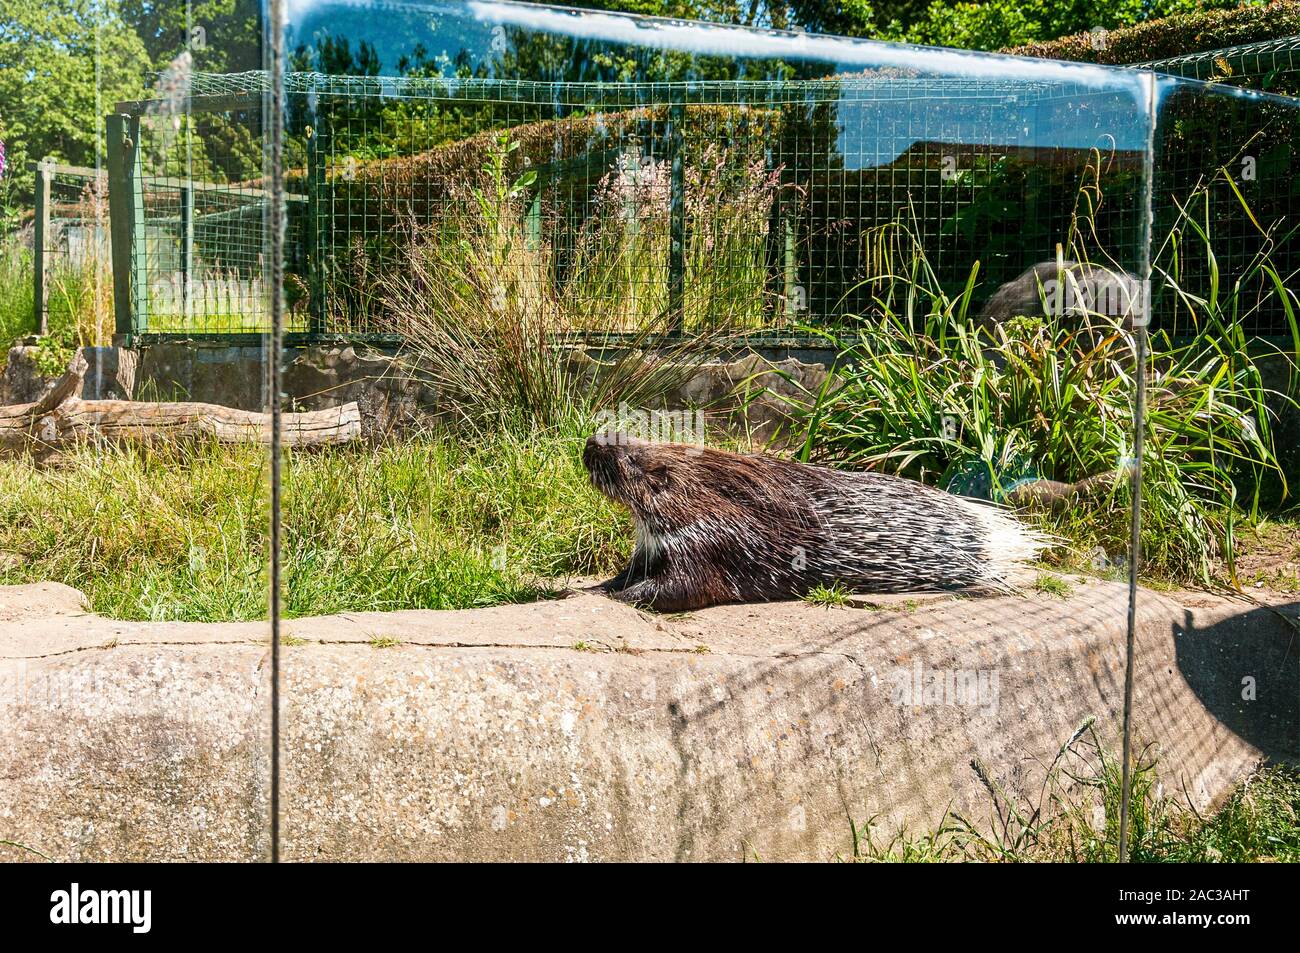 A porcupine with brown quills and black and white quills lies on a concrete base absorbing the warm sunlight backed by dry green grasses and shrubs Stock Photo